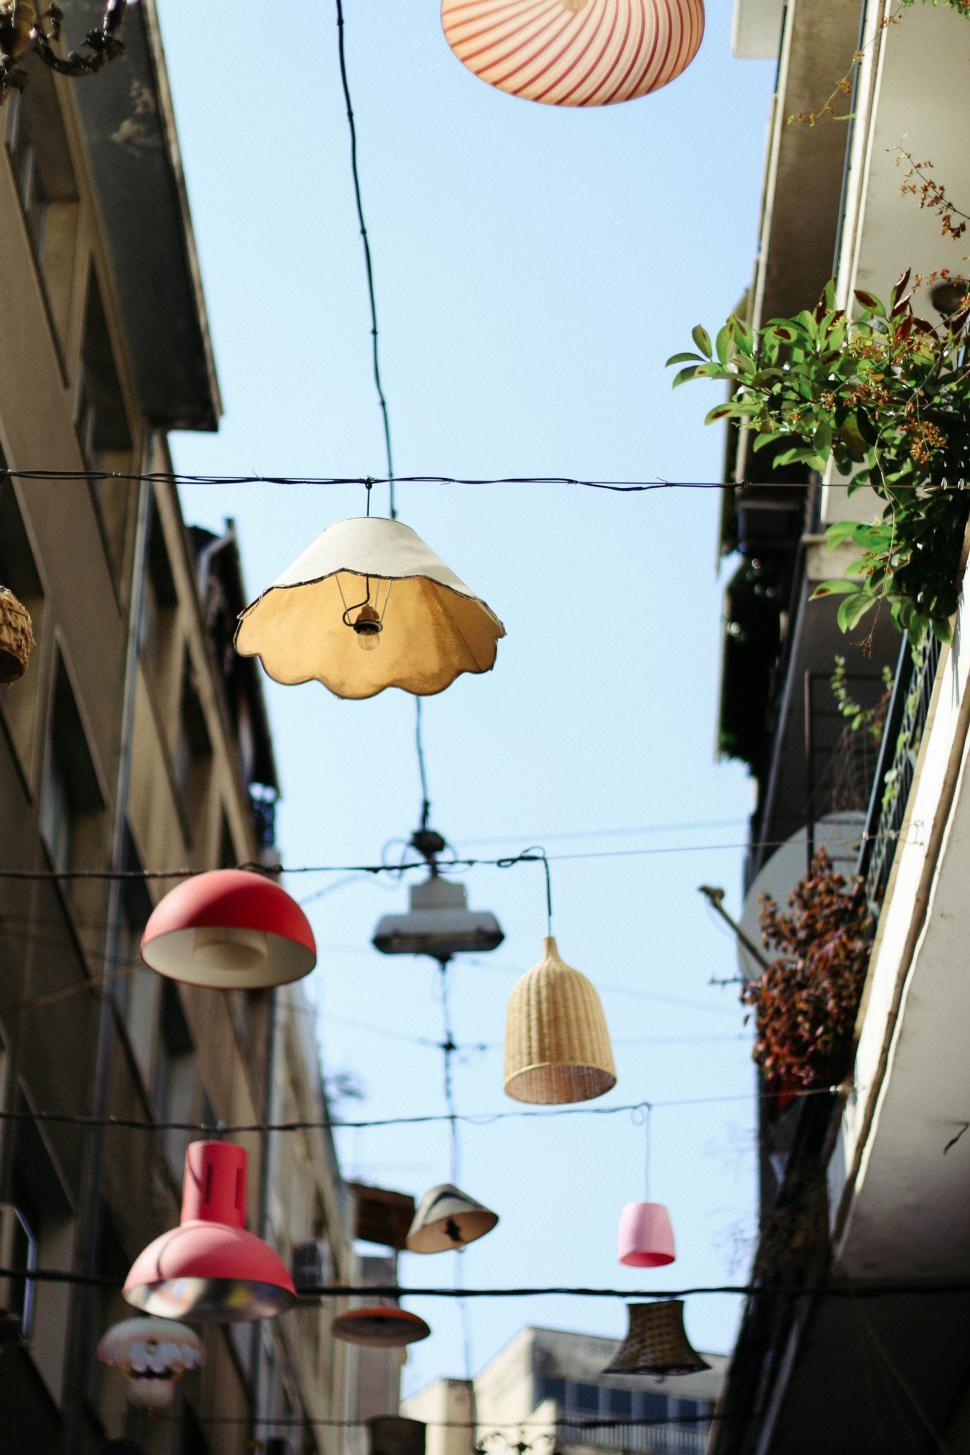 Free Image of Group of Lamps Hanging From Side of Building 